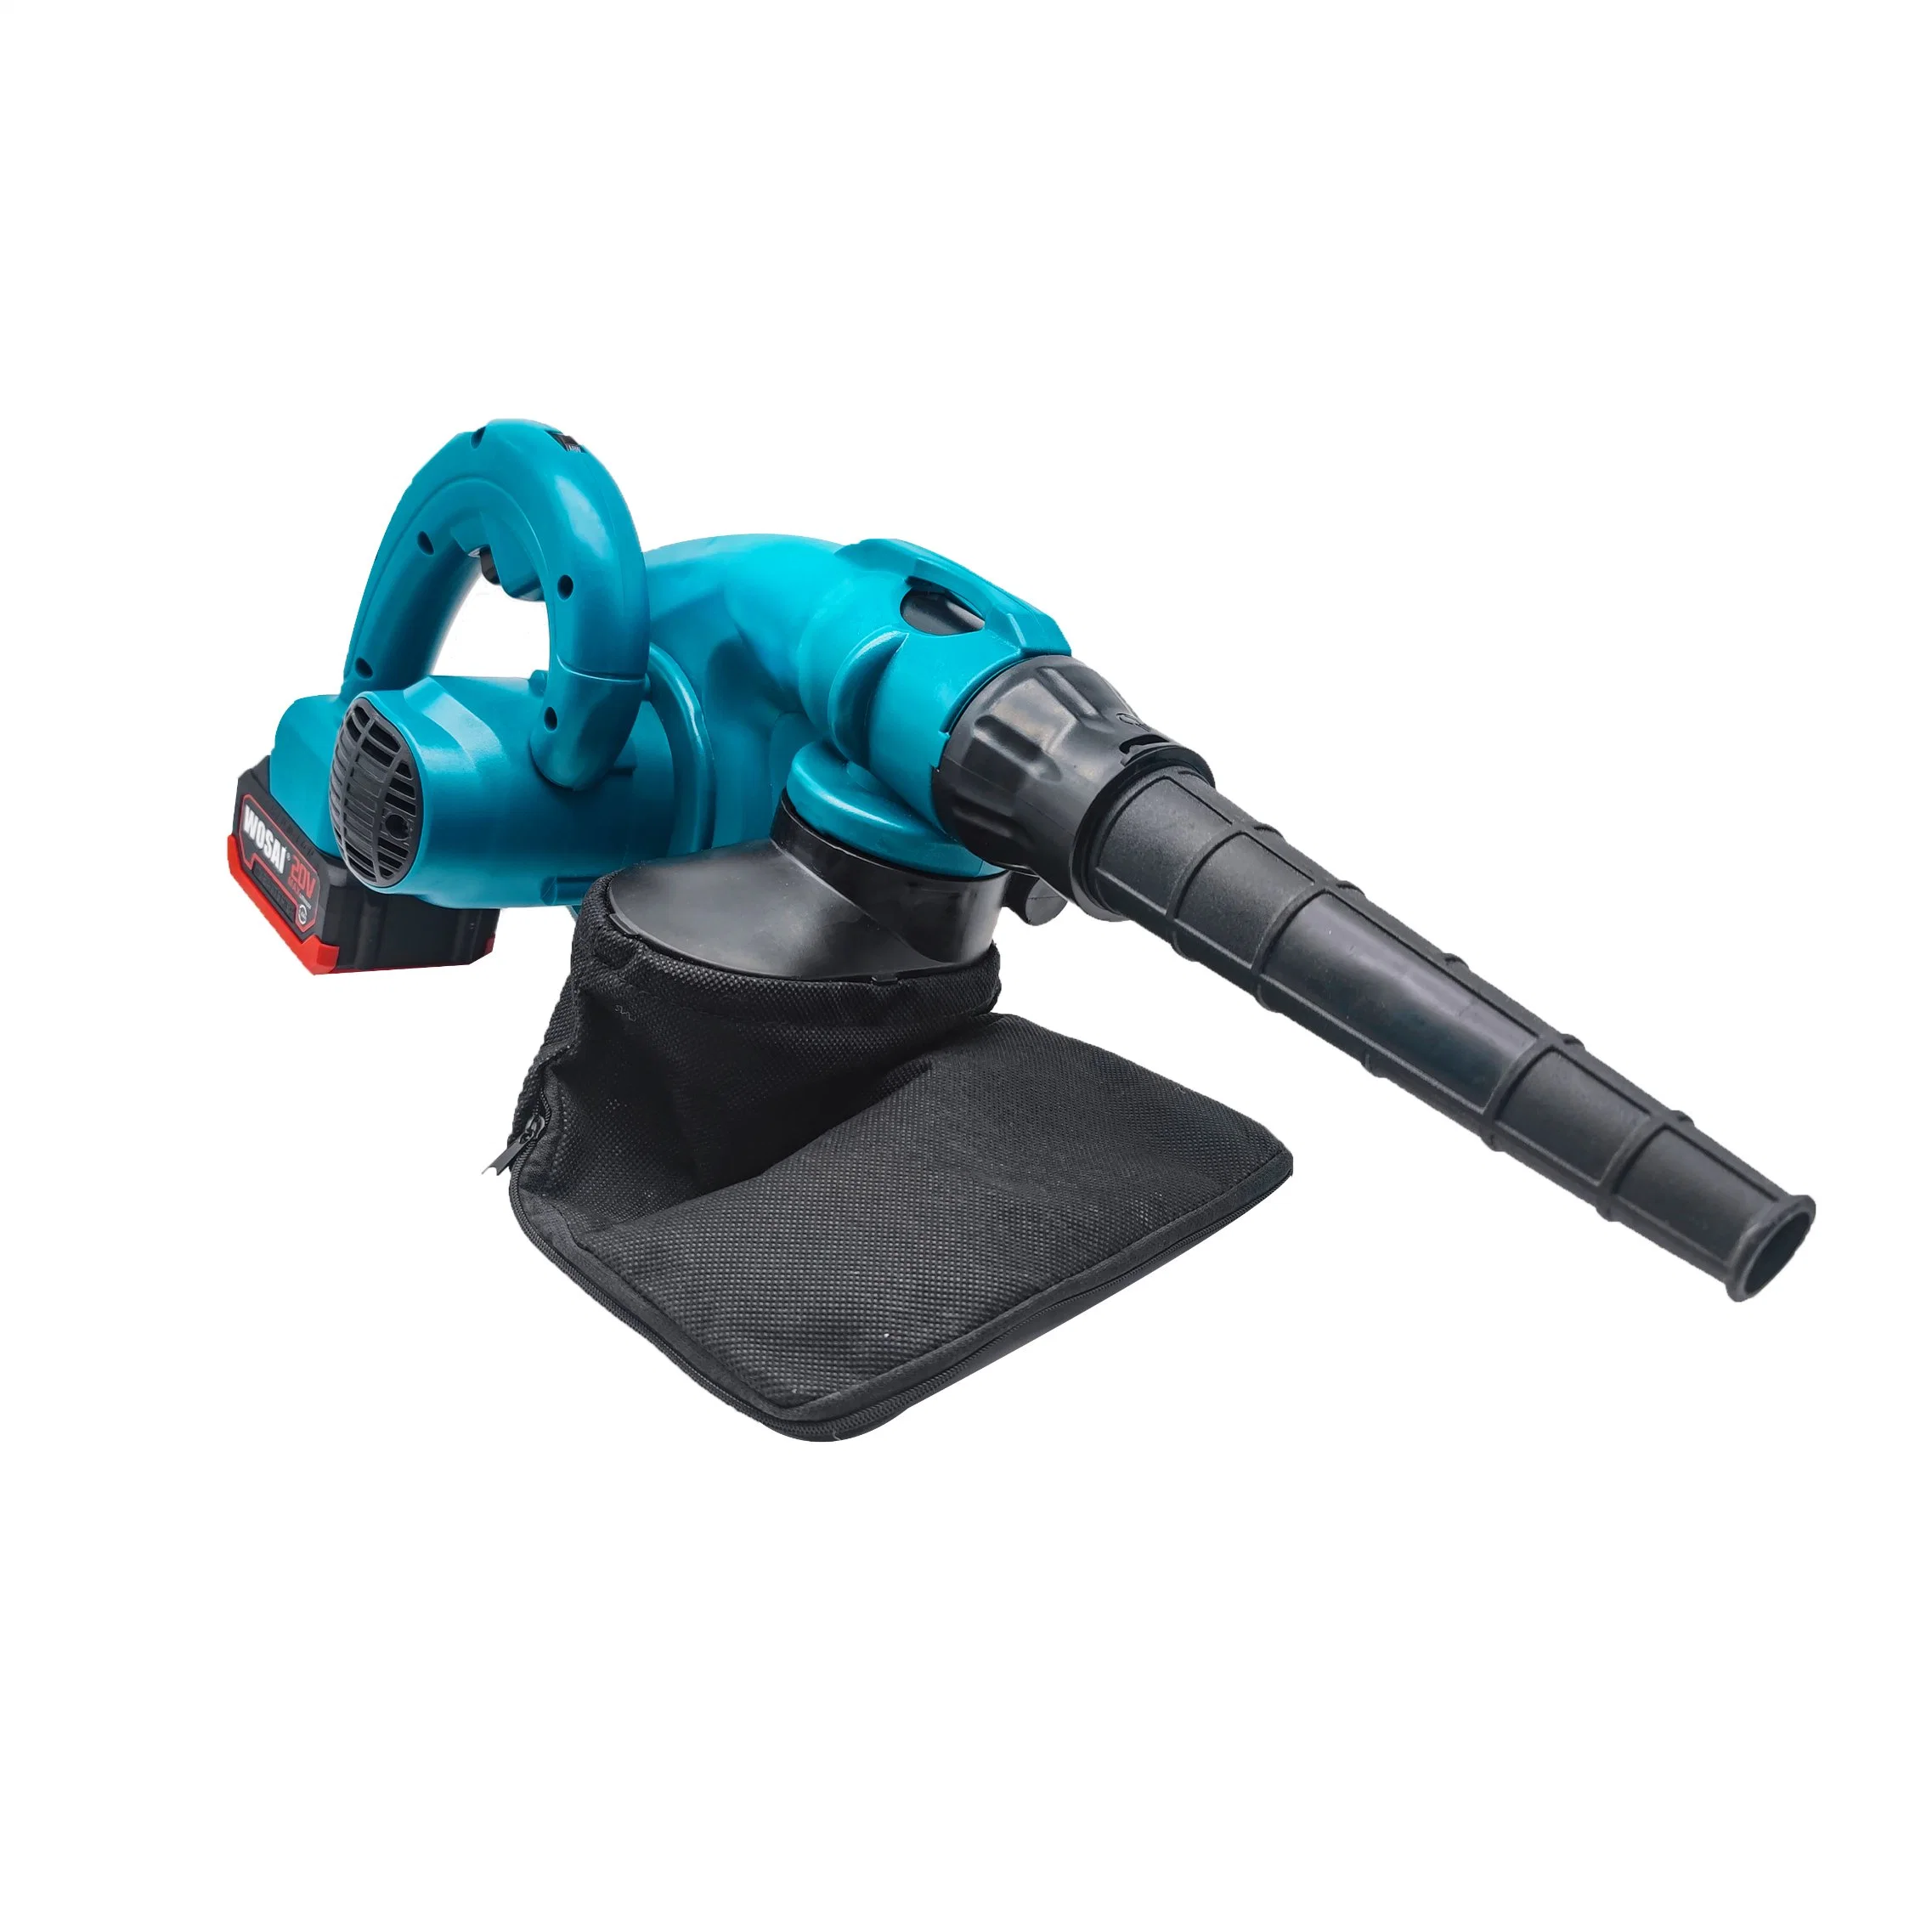 Wosai Brushless Cordless Electric Leaf Blower Battery Garden Tools China 24V DC Fan Blower